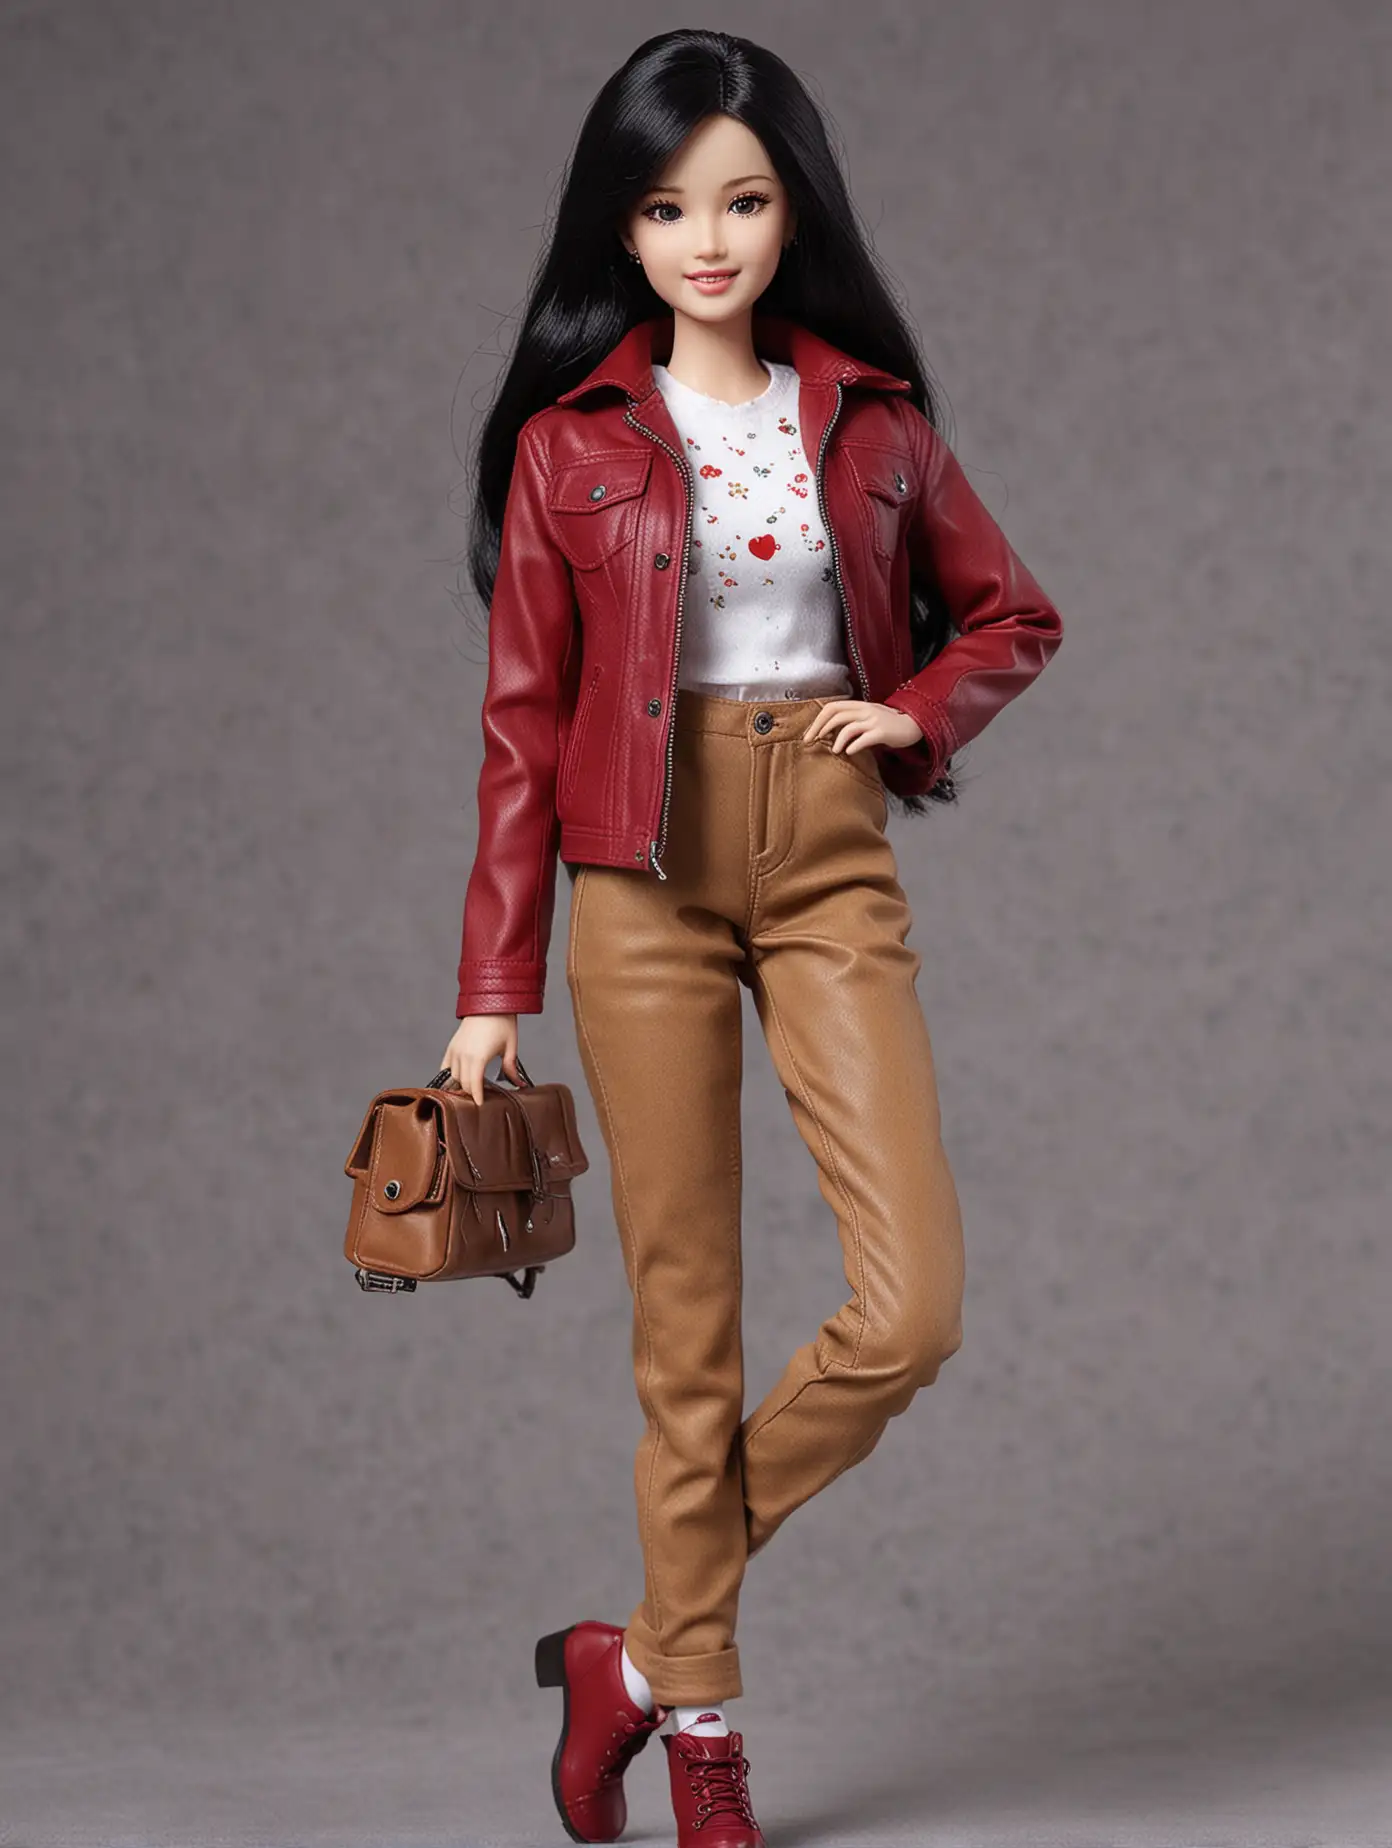 Stylish Kim Hyeyoon Barbie Doll in Maroon Leather Jacket and Red Shoes